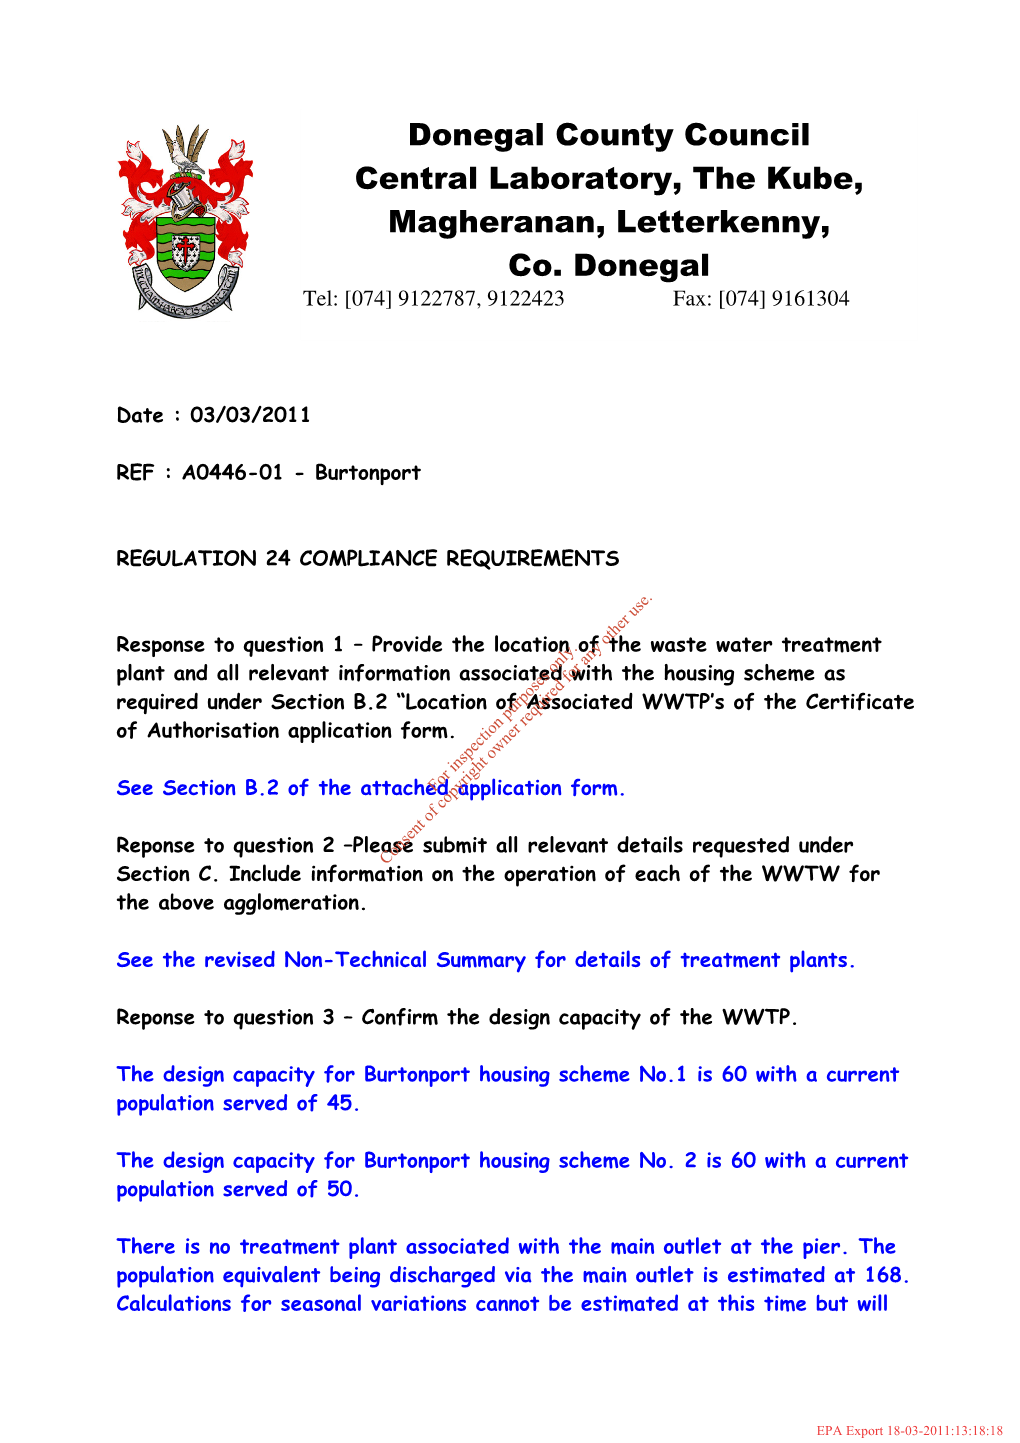 Donegal County Council Central Laboratory, the Kube, Magheranan, Letterkenny, Co